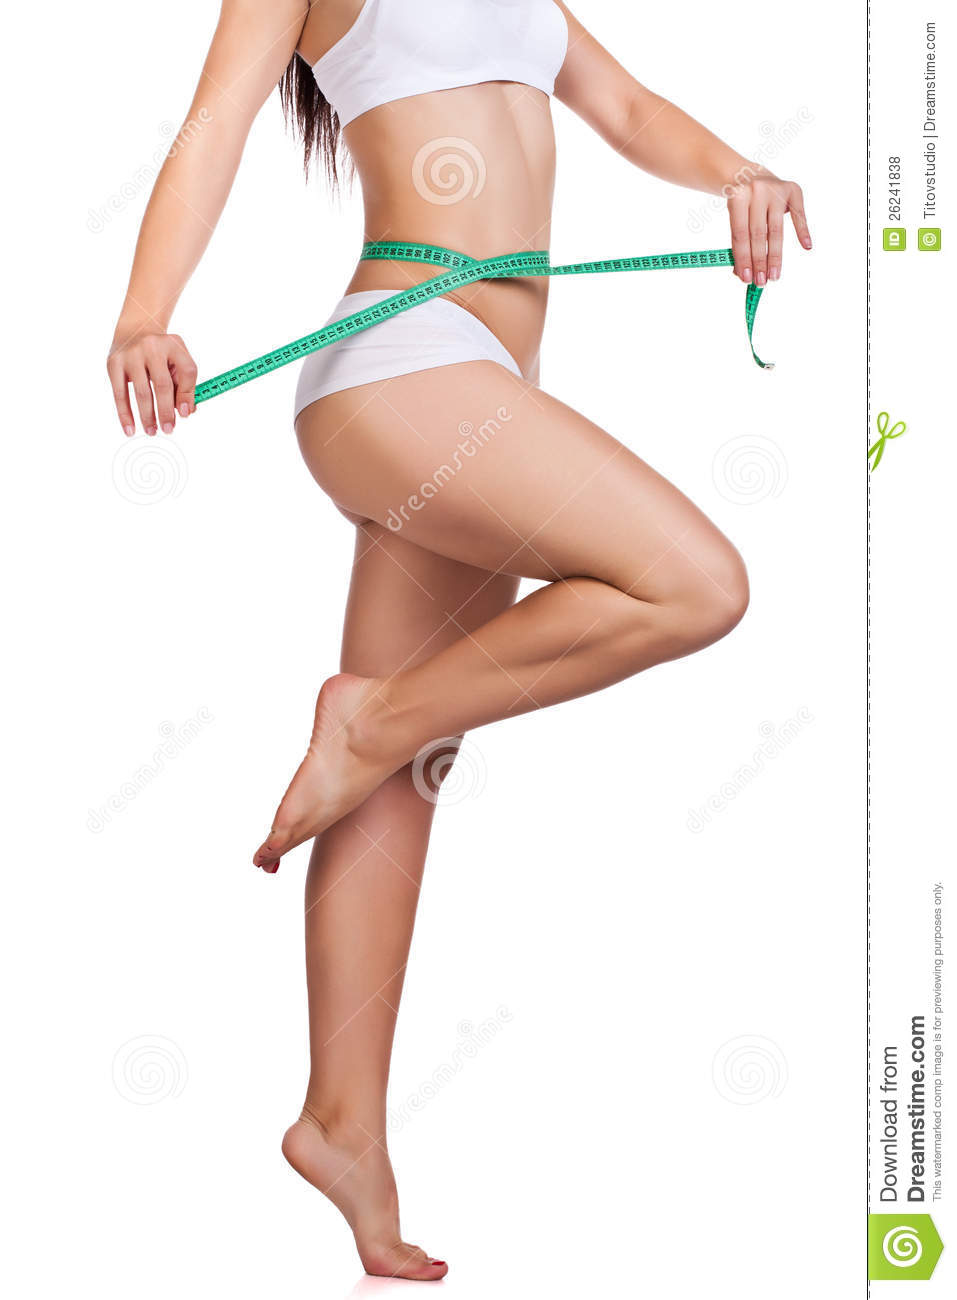 Sporty Woman S Body And Measuring Tape Royalty Free Stock Photos